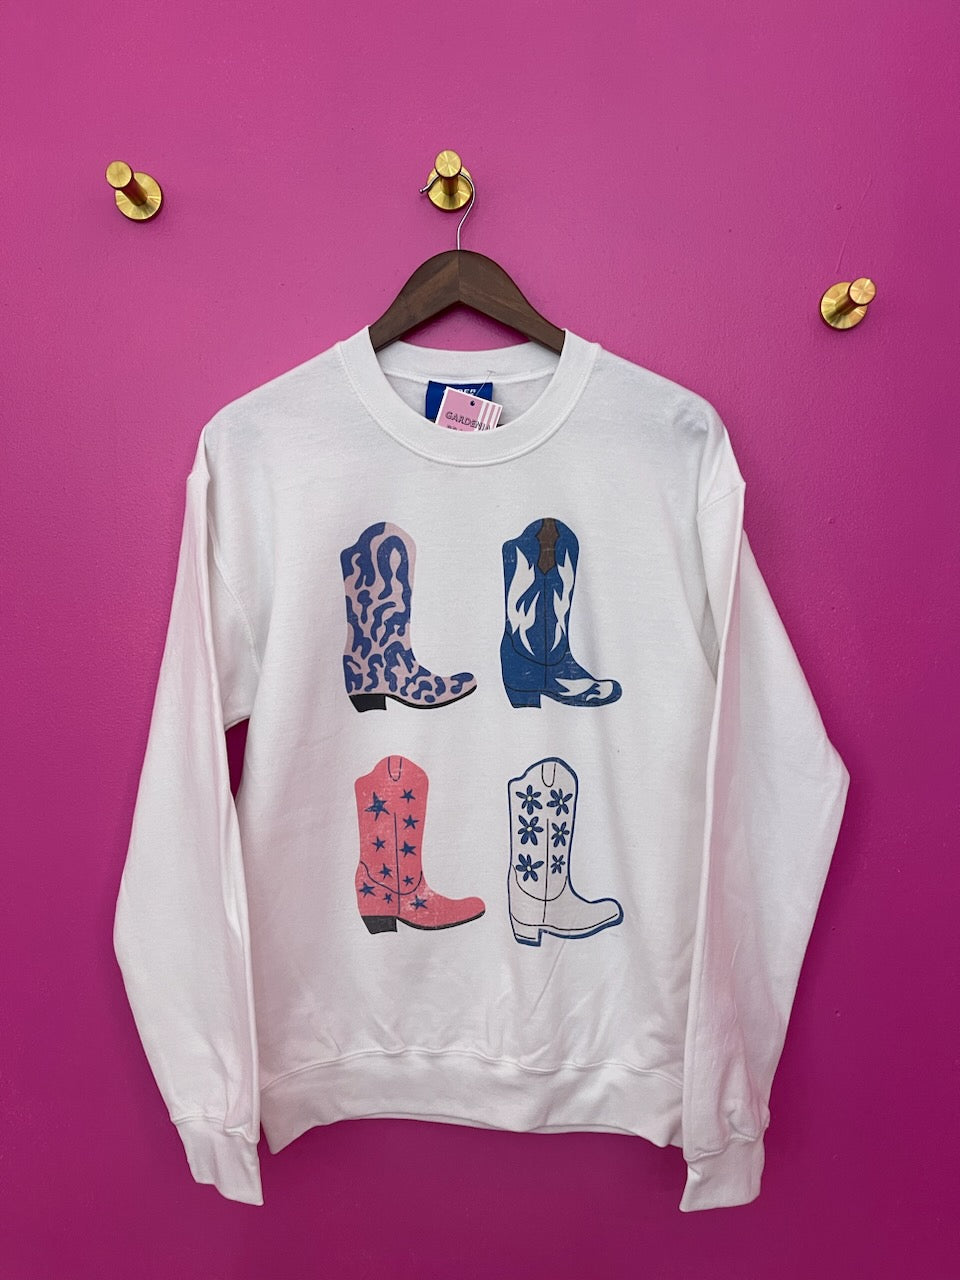 Cowgirl Boots Oversized in White Sweatshirt